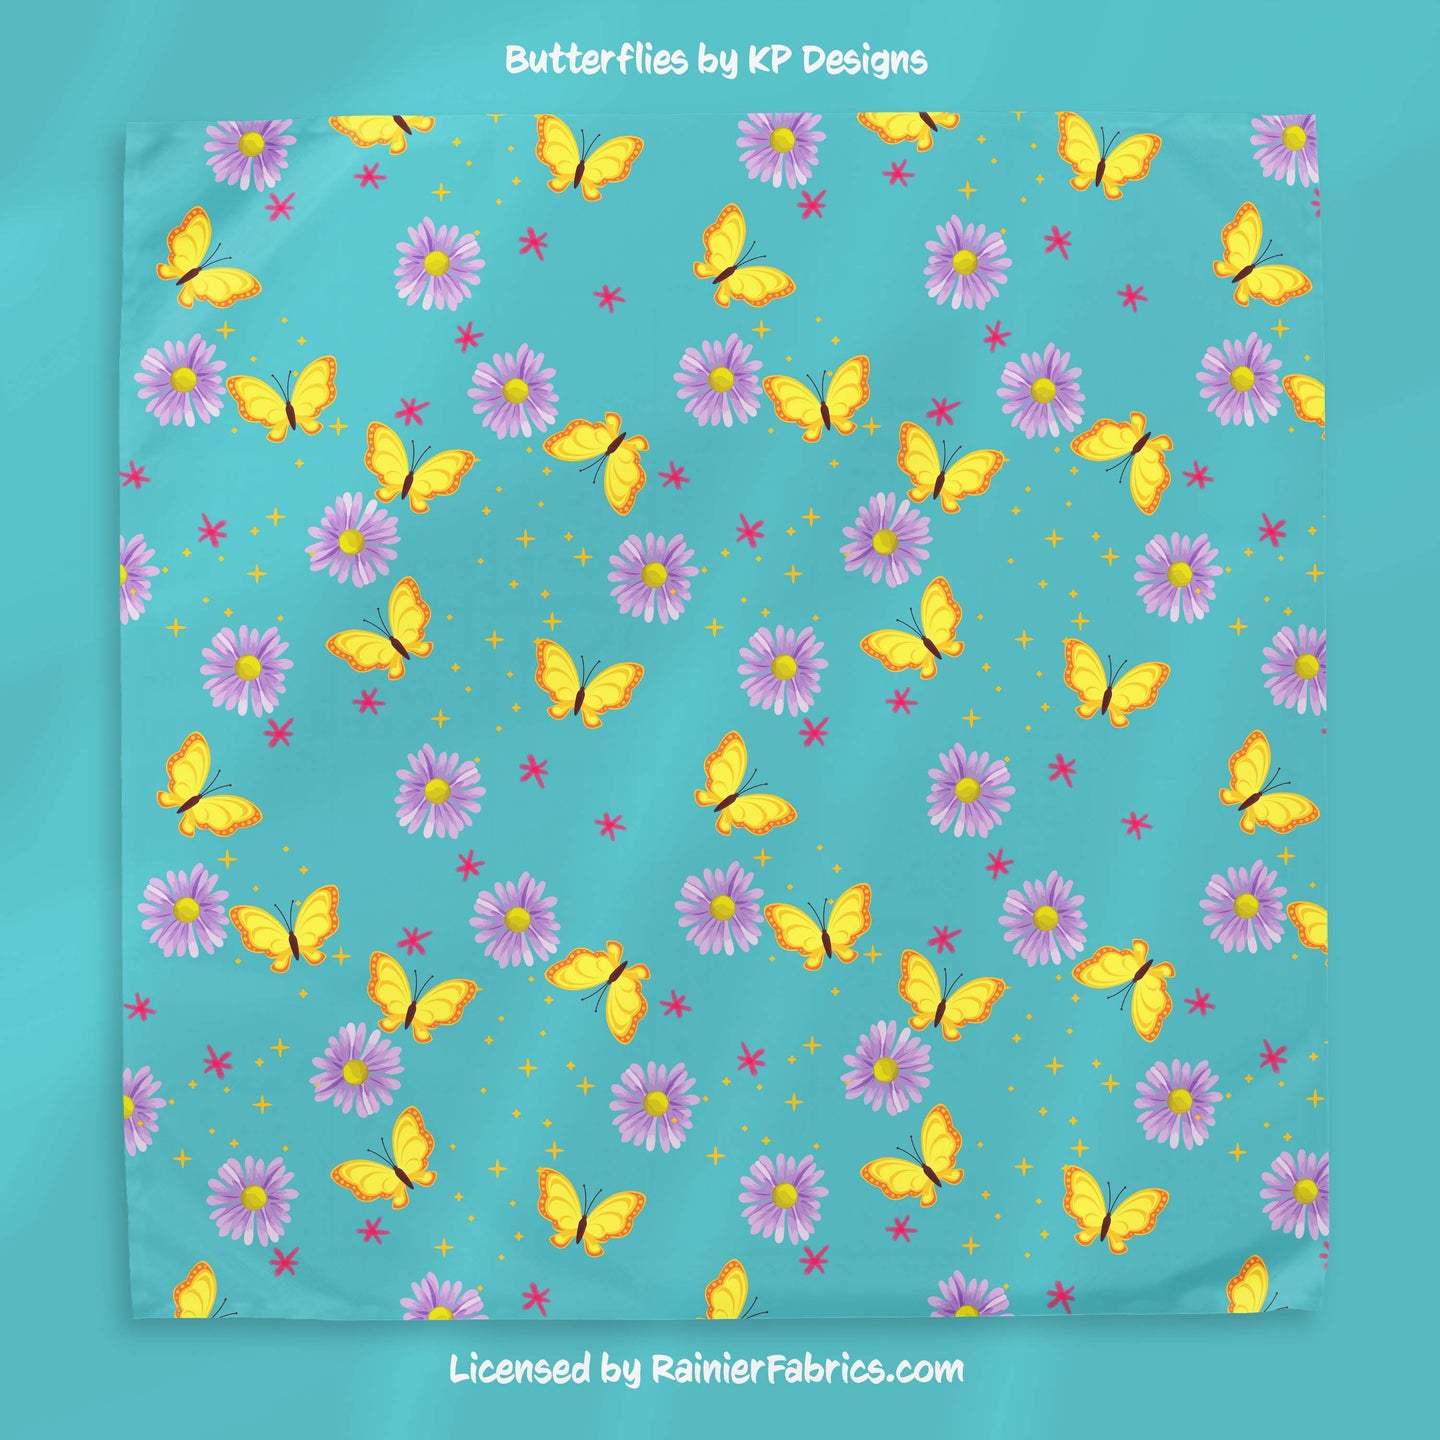 Butterflies by KP Design - 2-5 day turnaround - Order by 1/2 yard; Description of bases below